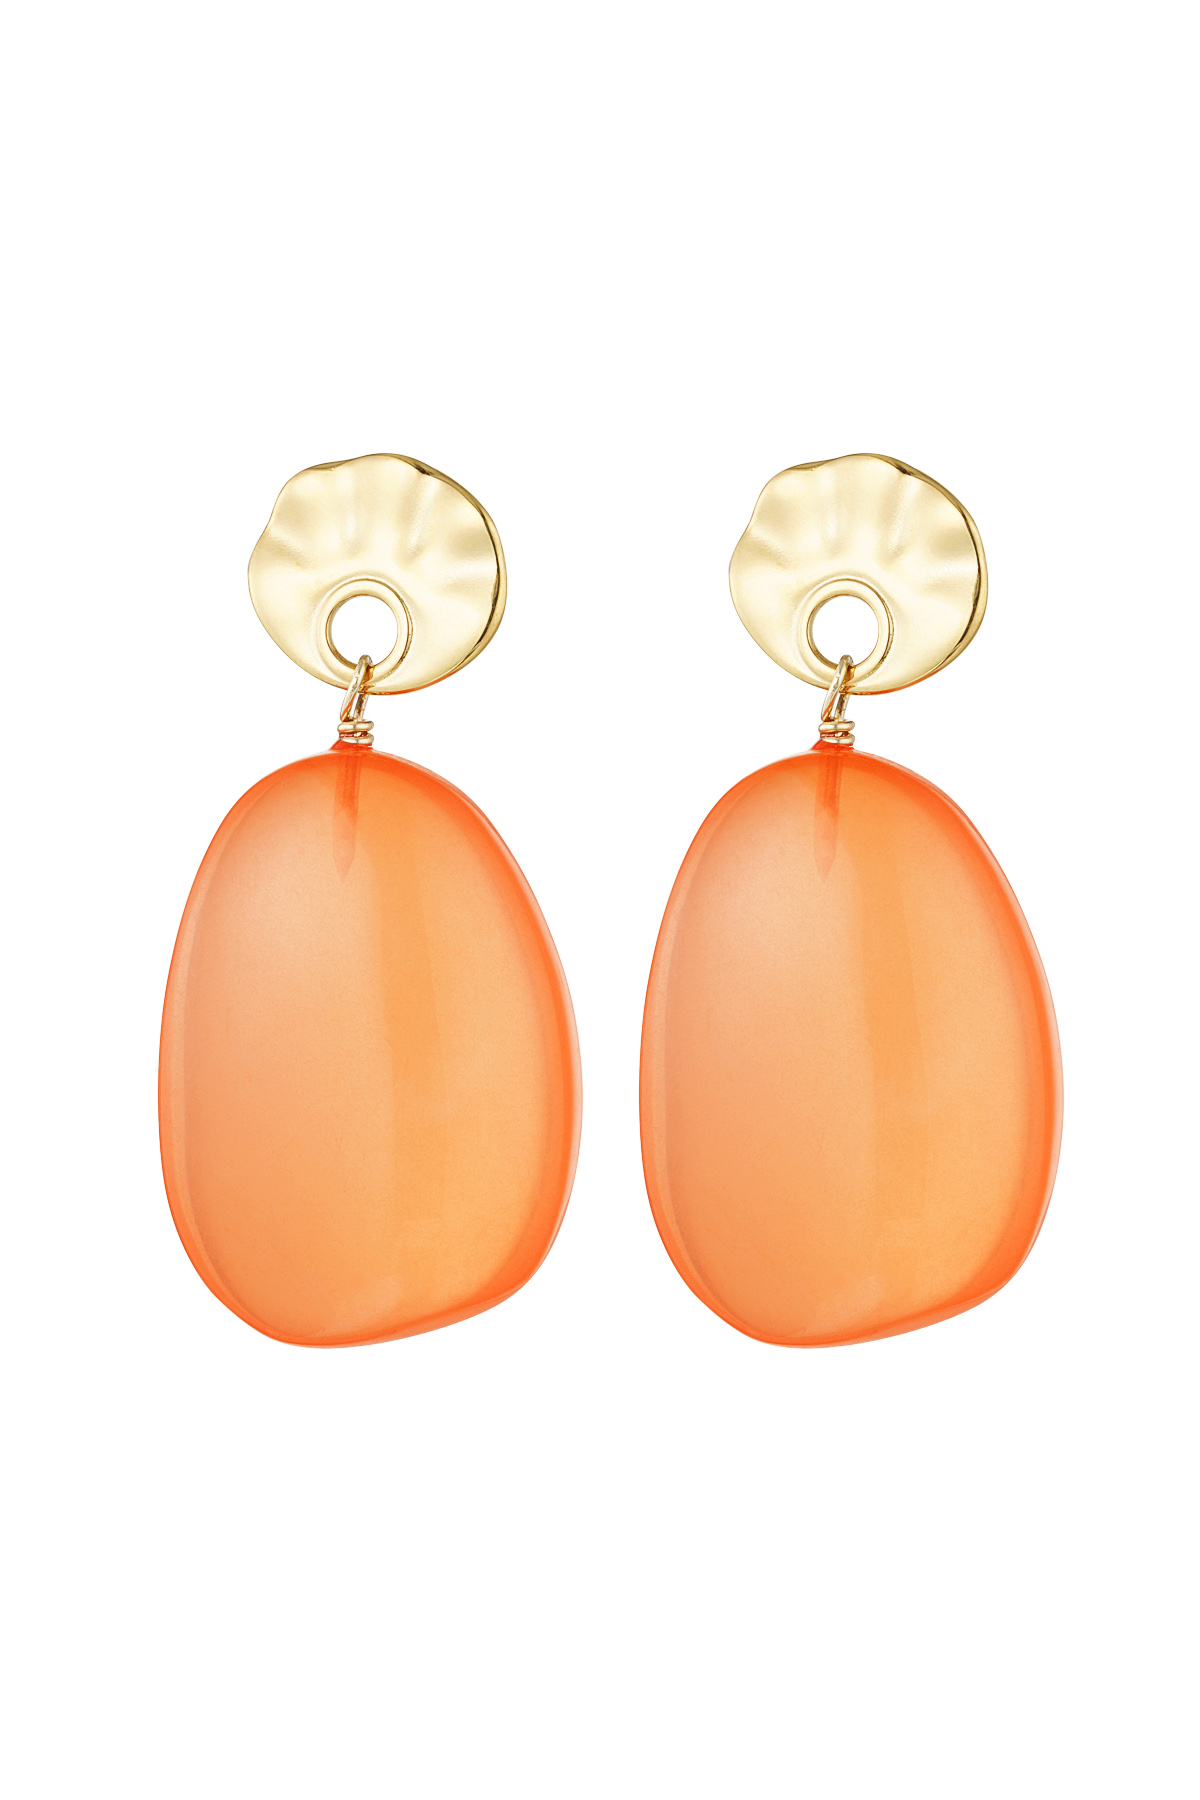 Earrings round and oval - orange/gold 